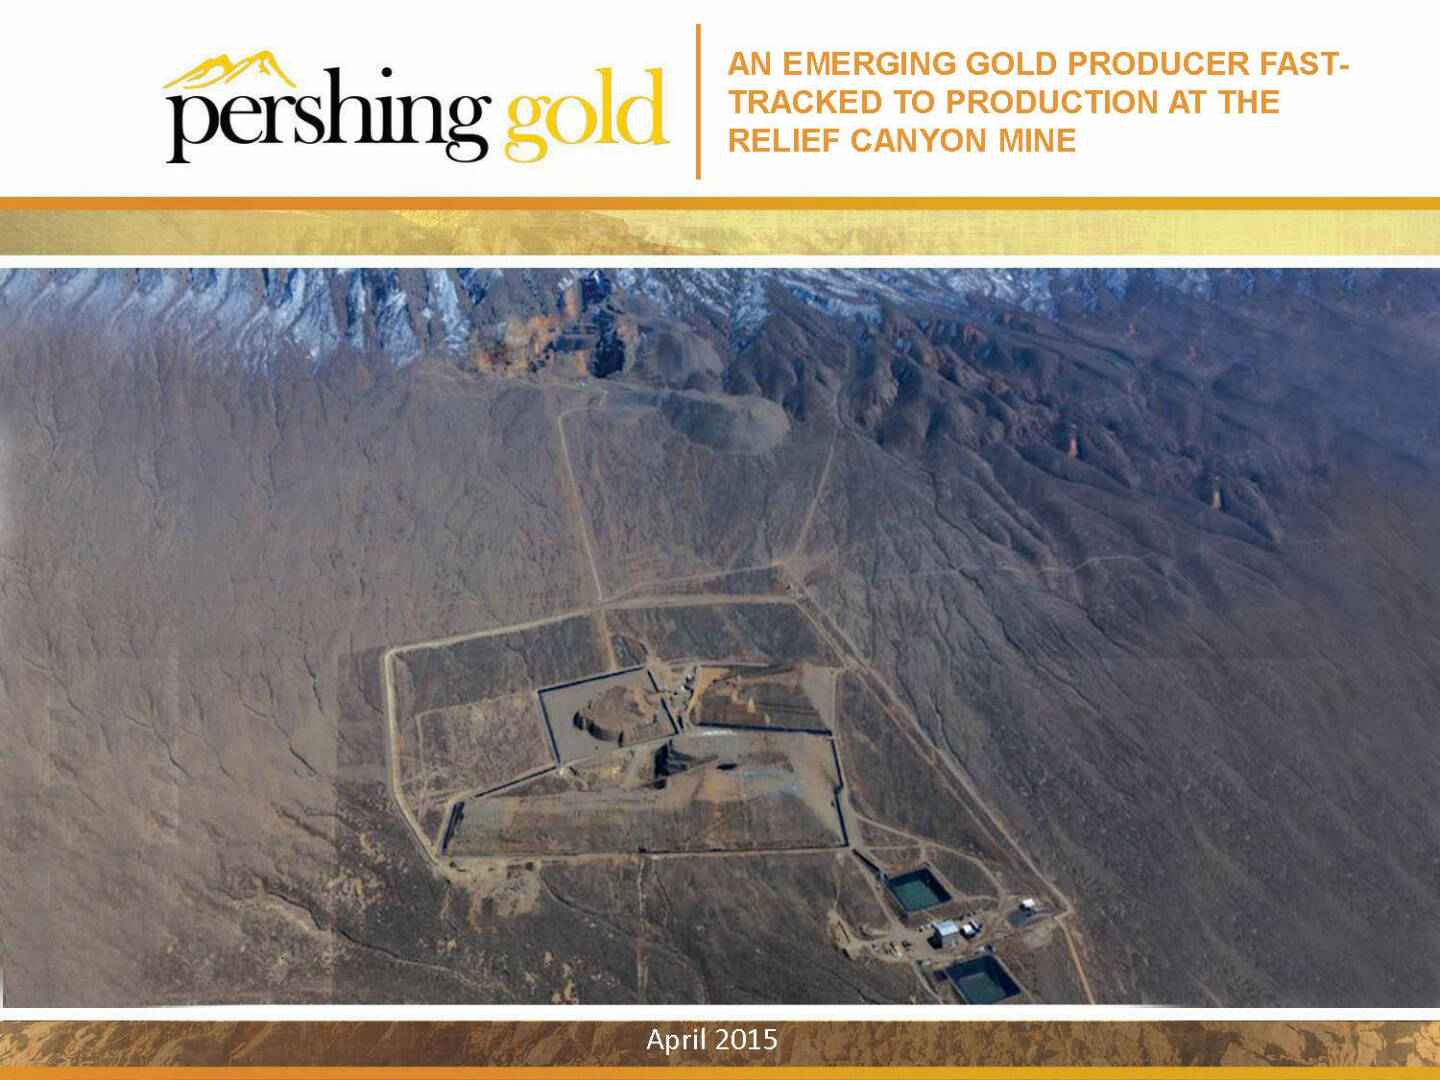 An emerging gold producer fast-tracked to production at the Relief Canyon Mine - Pershing Gold